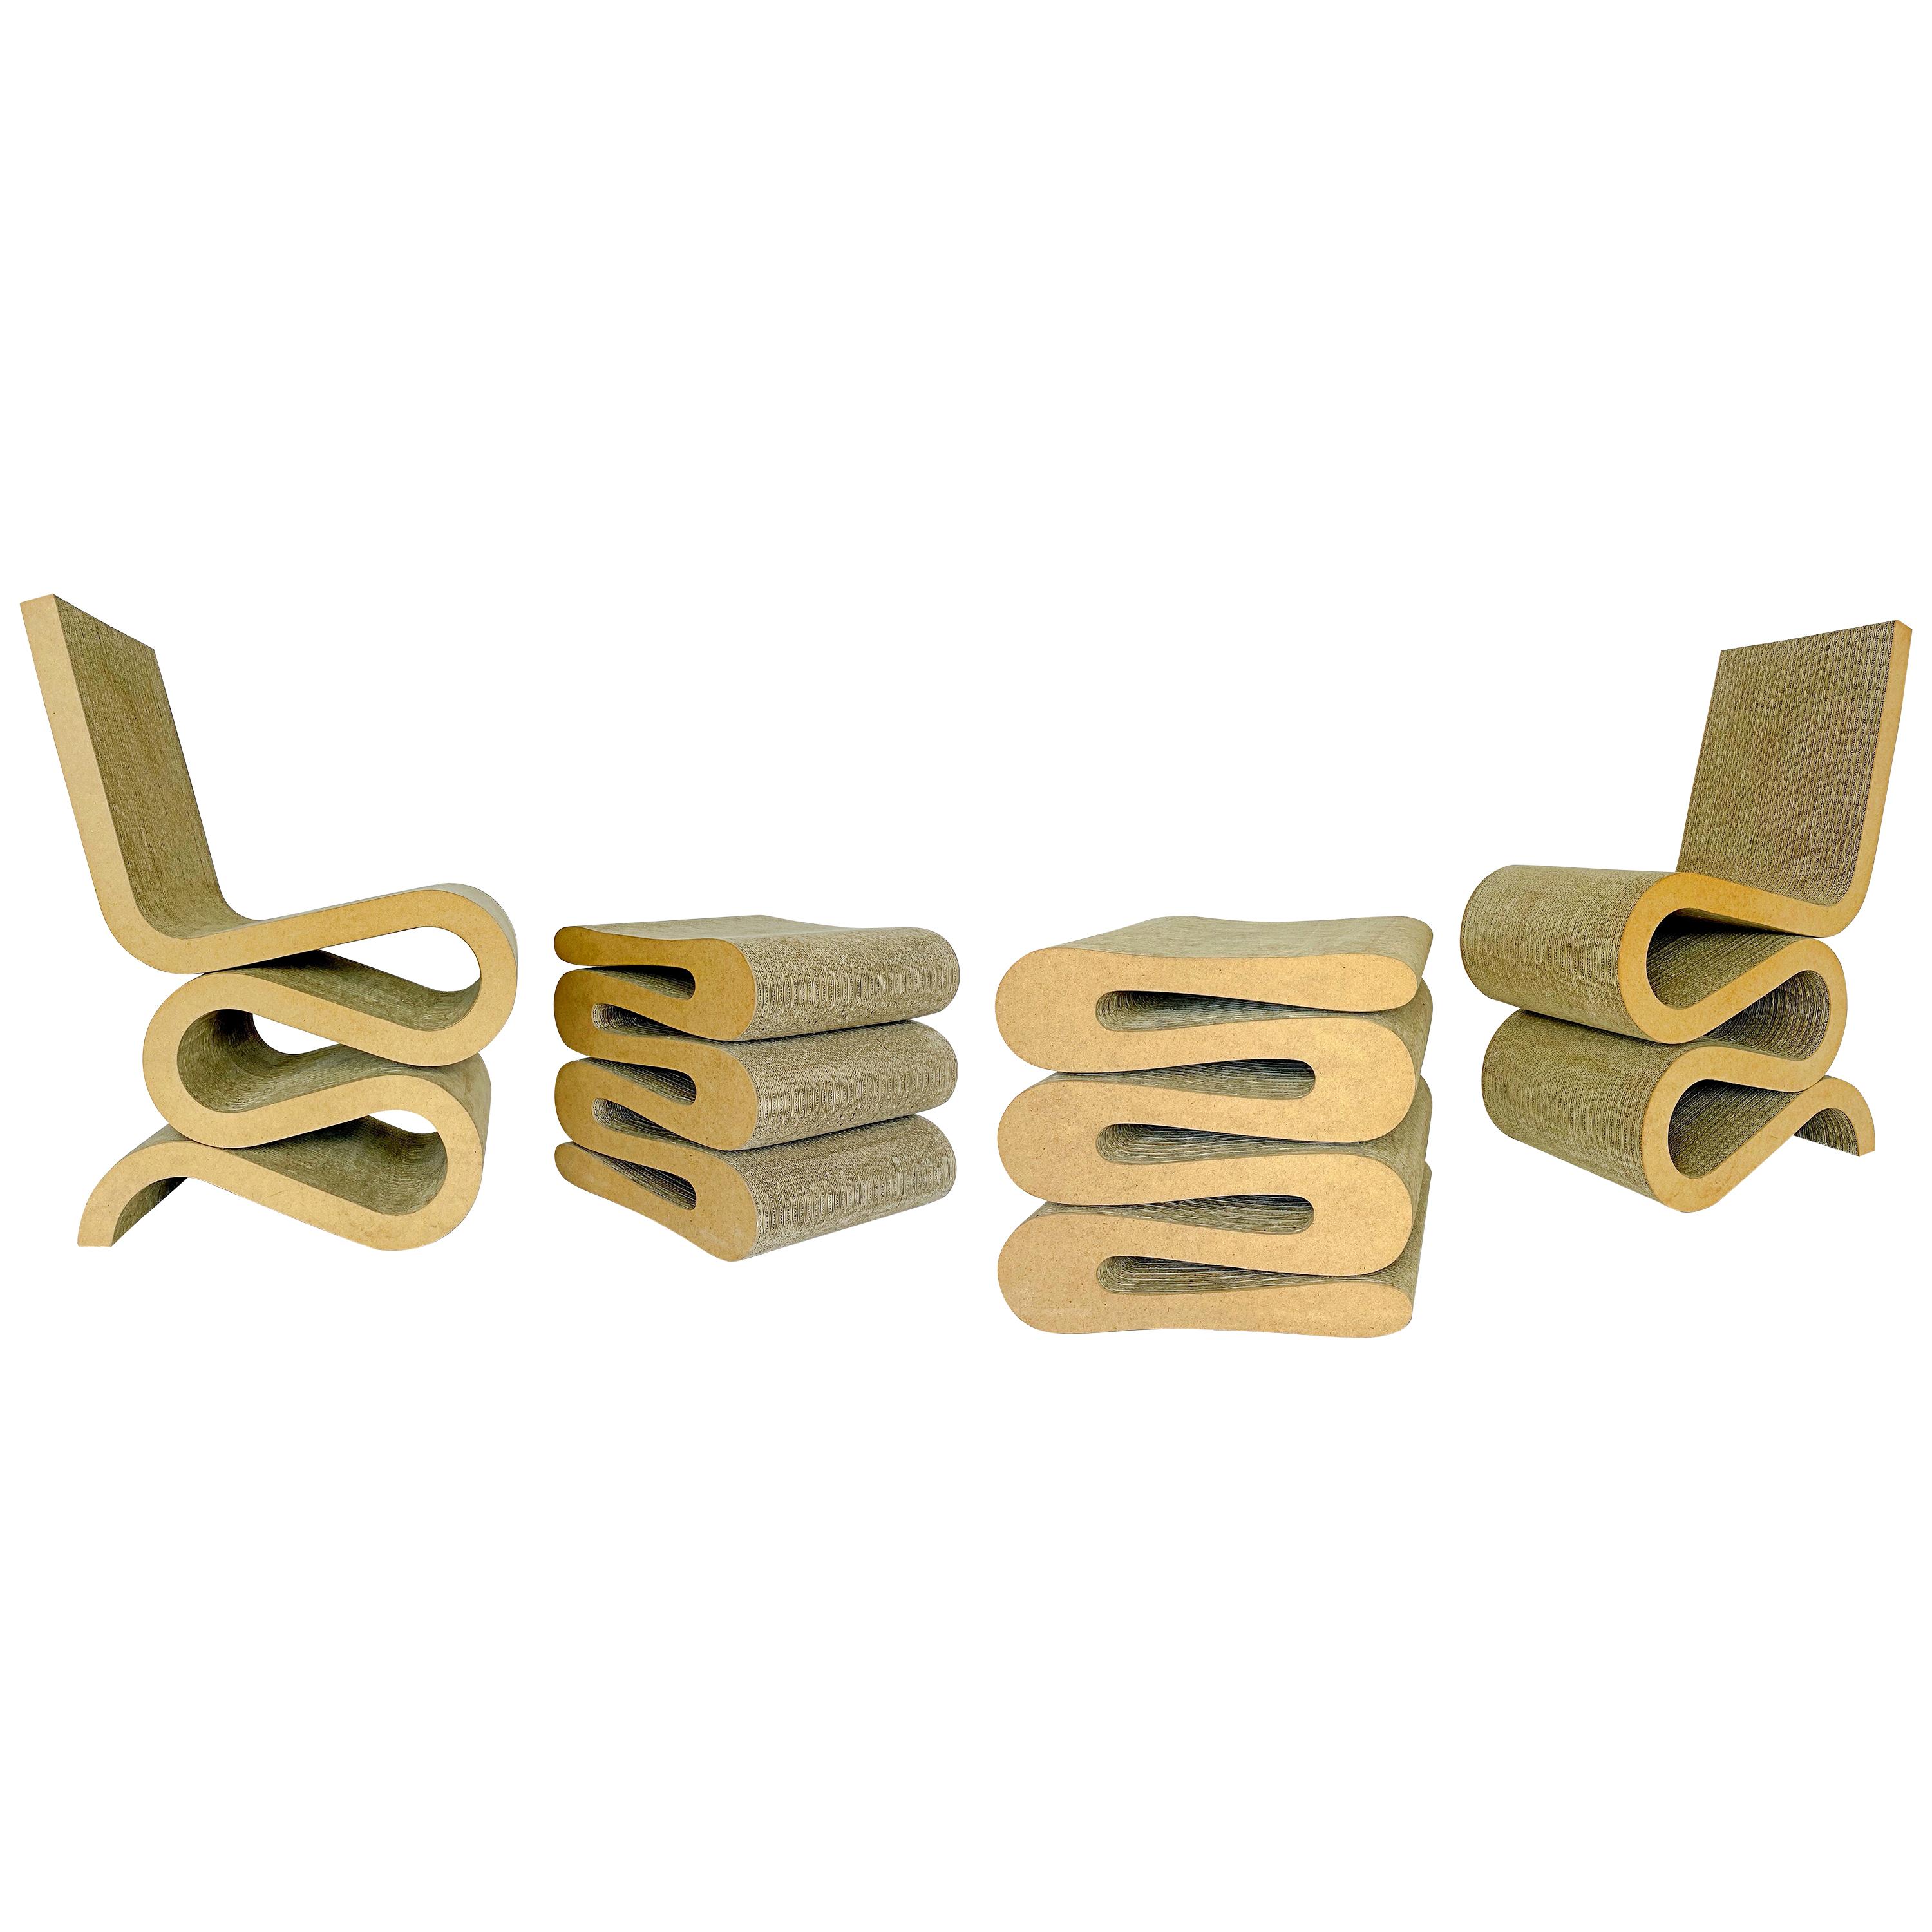 Frank O. Gehry's "Wiggle" Side Chairs and Stools, Vitra 1990s